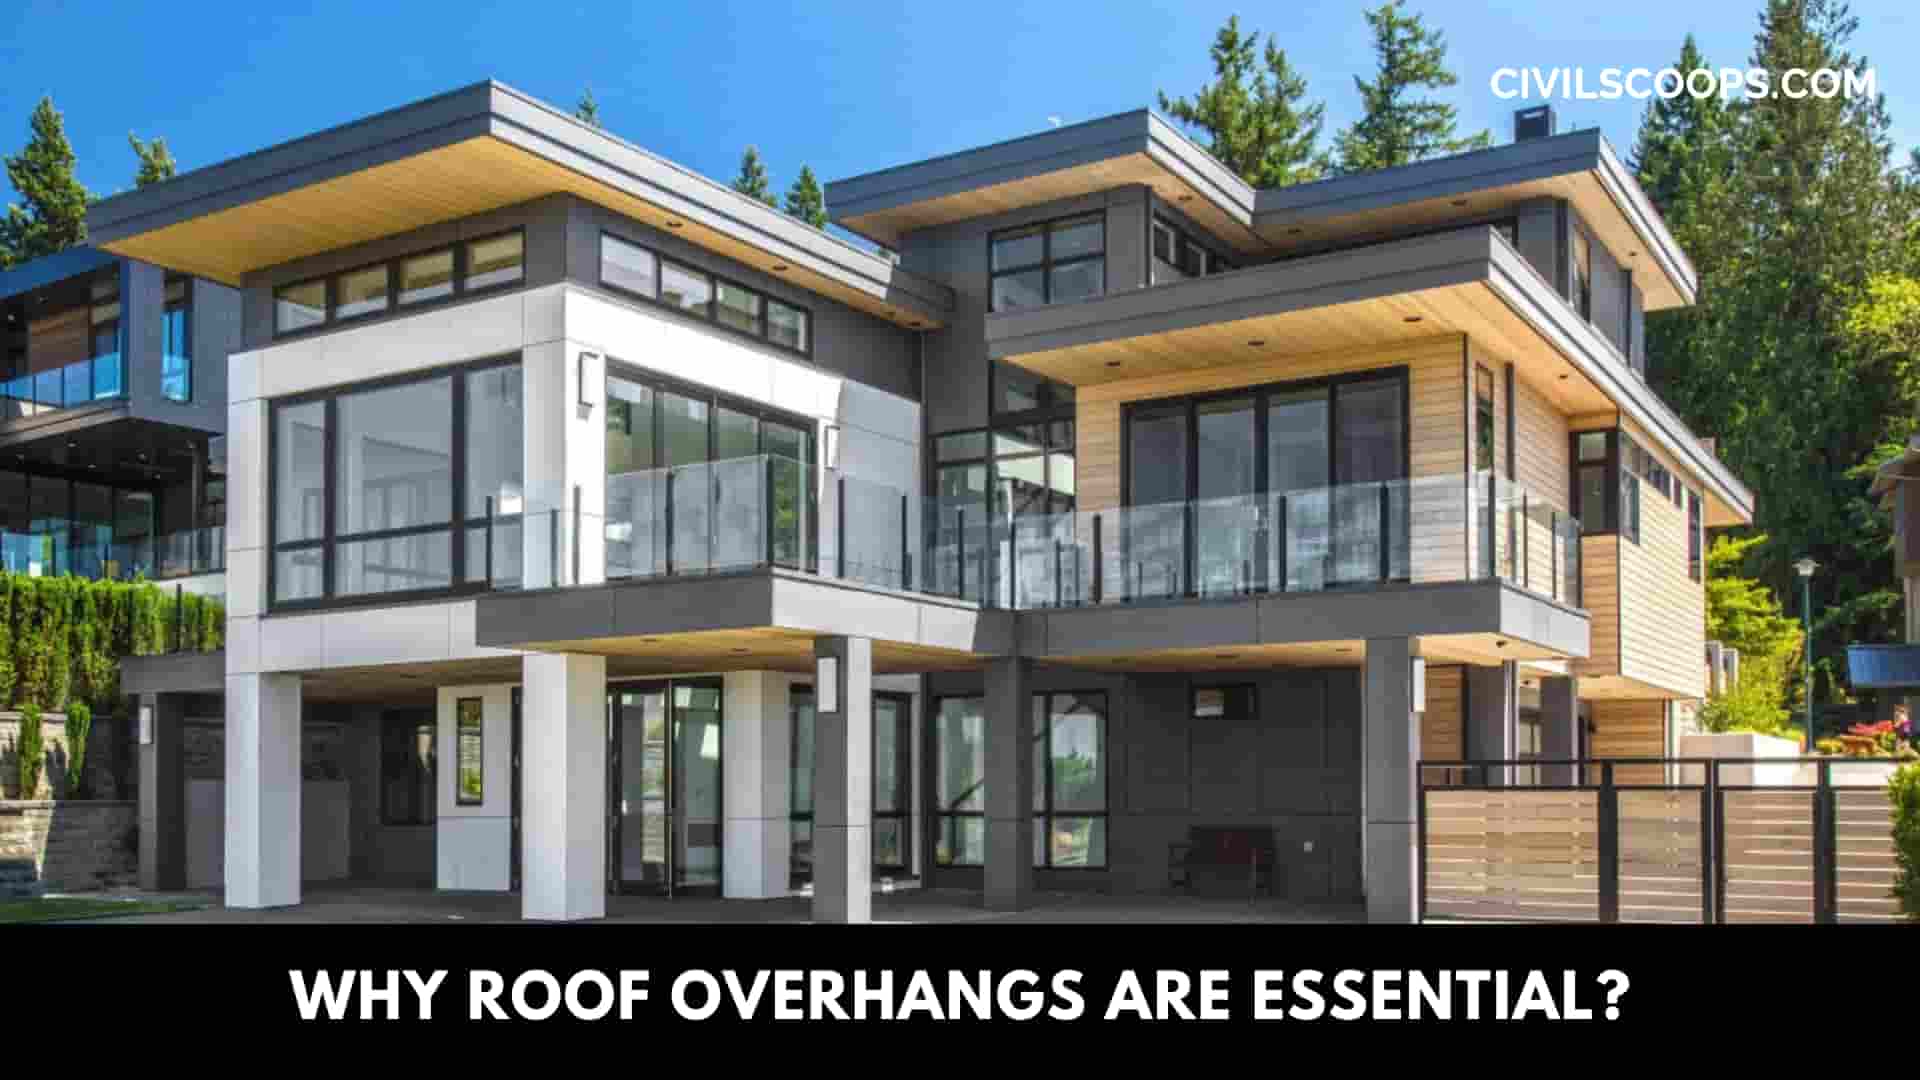 Why Roof Overhangs Are Essential?